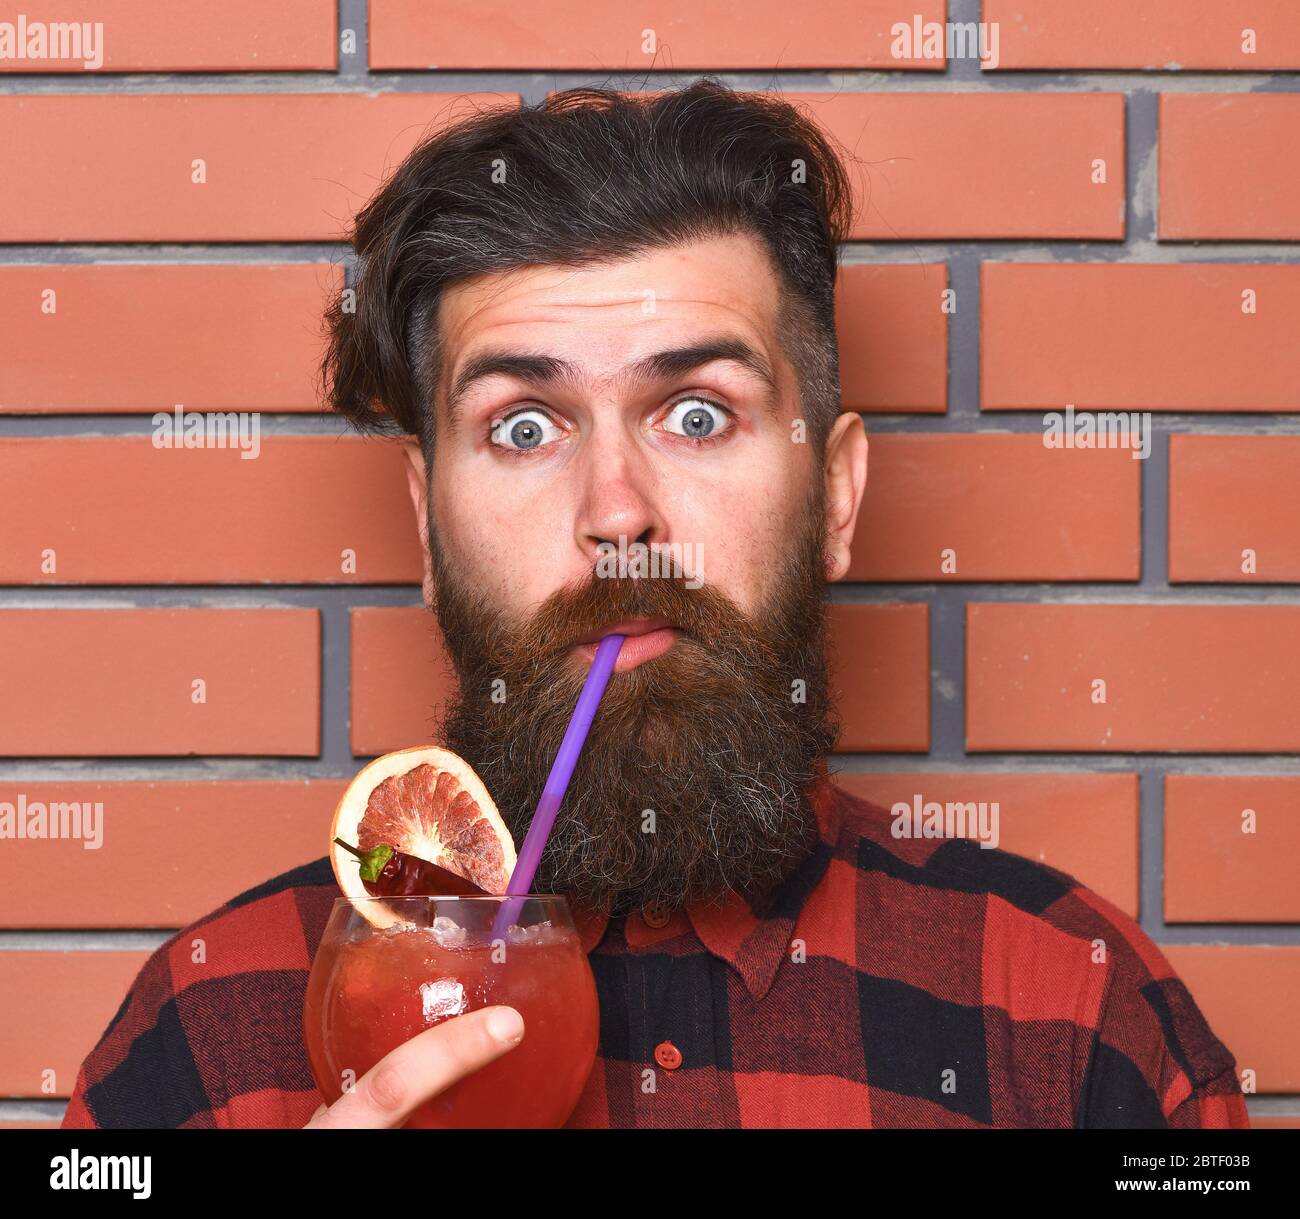 Alcohol and spirit concept. Hipster enjoy strong drink or cocktail. Barman with beard and surprised face drinks out of glass with drinking straw cocktail. Man drinks cocktail on brick wall background. Stock Photo